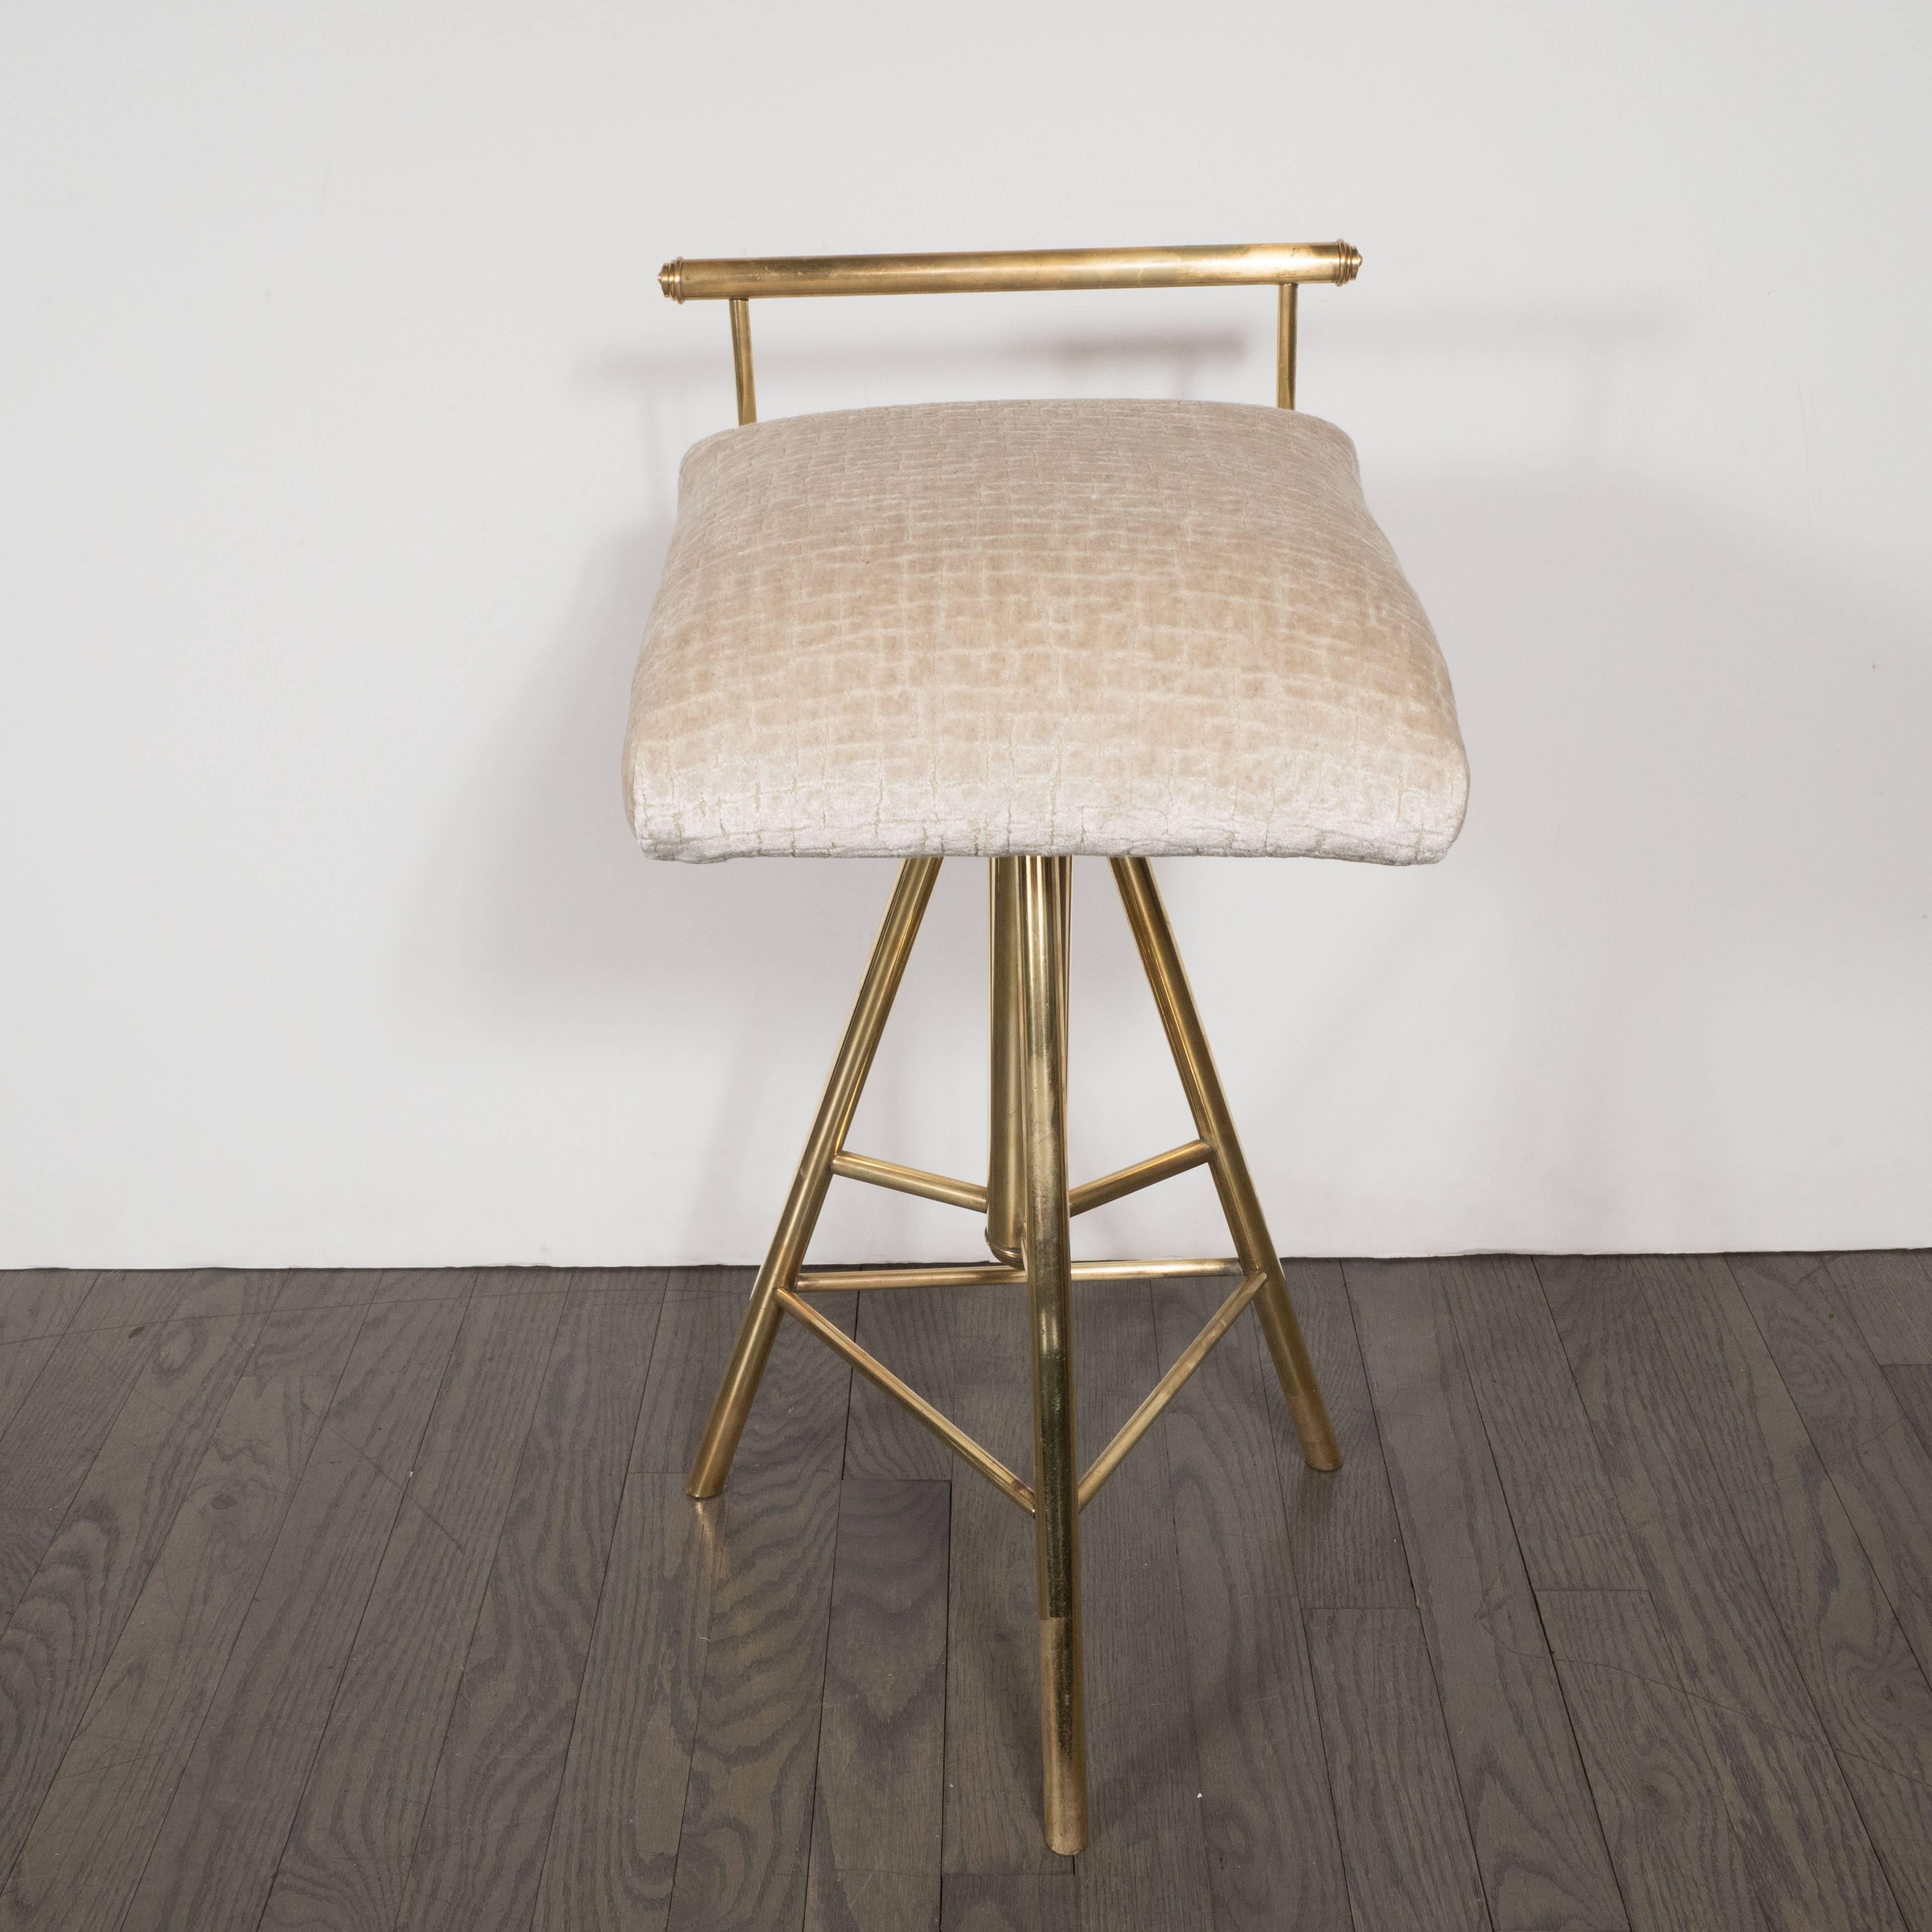 This stunning Mid-Century Modern stool features a tripod form consisting of three cylindrical brushed brass legs connected with triangular supports. The swiveling seat attaches to a circular base from which extends a cylindrical rod that connects to